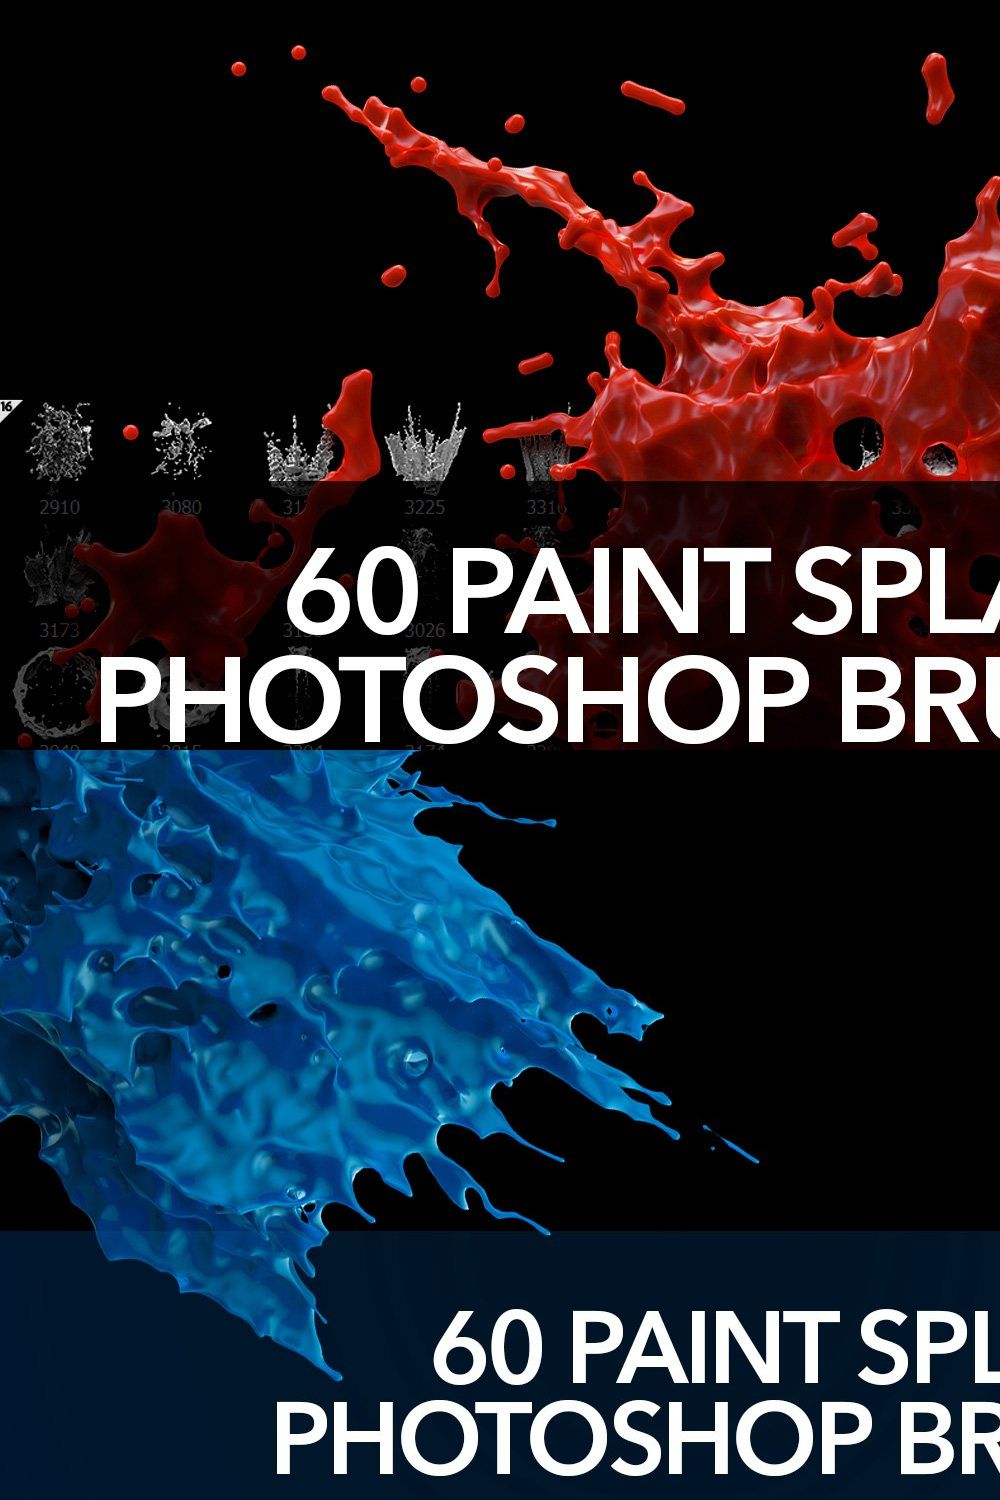 60 Paint Splash Brushes for PS pinterest preview image.